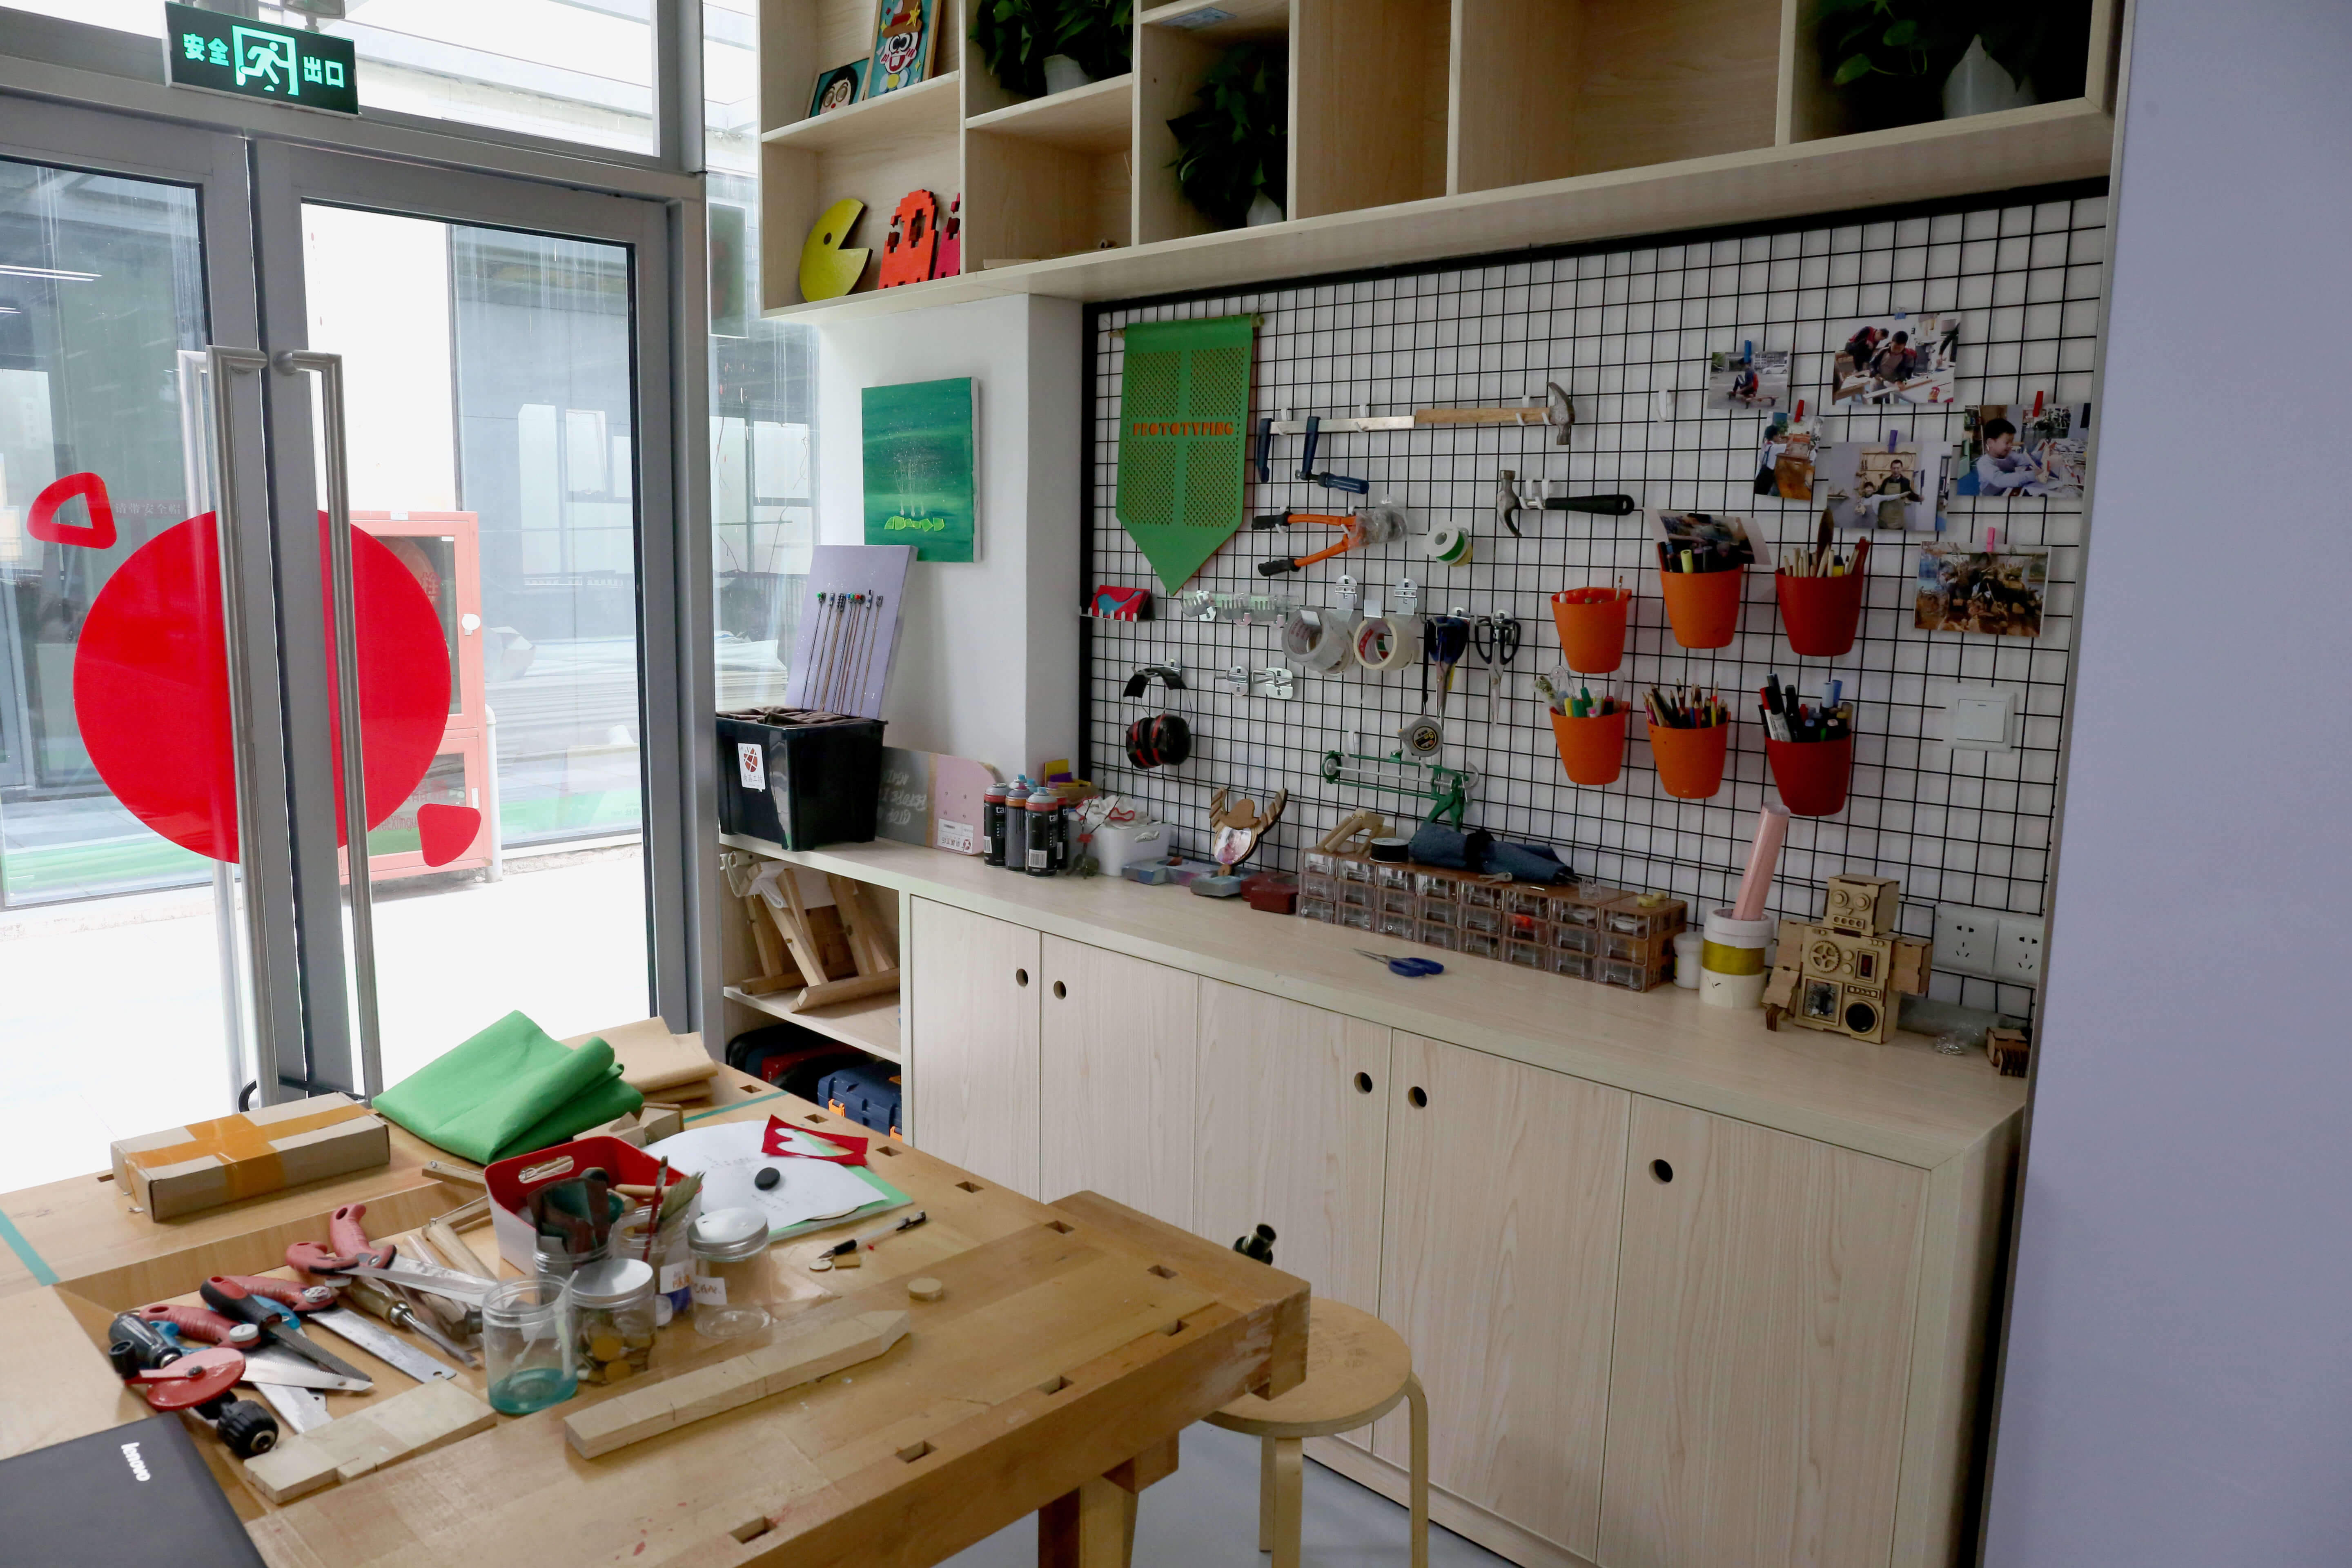 Litchee Lab is one of hundreds of “makerspaces” in Shenzhen